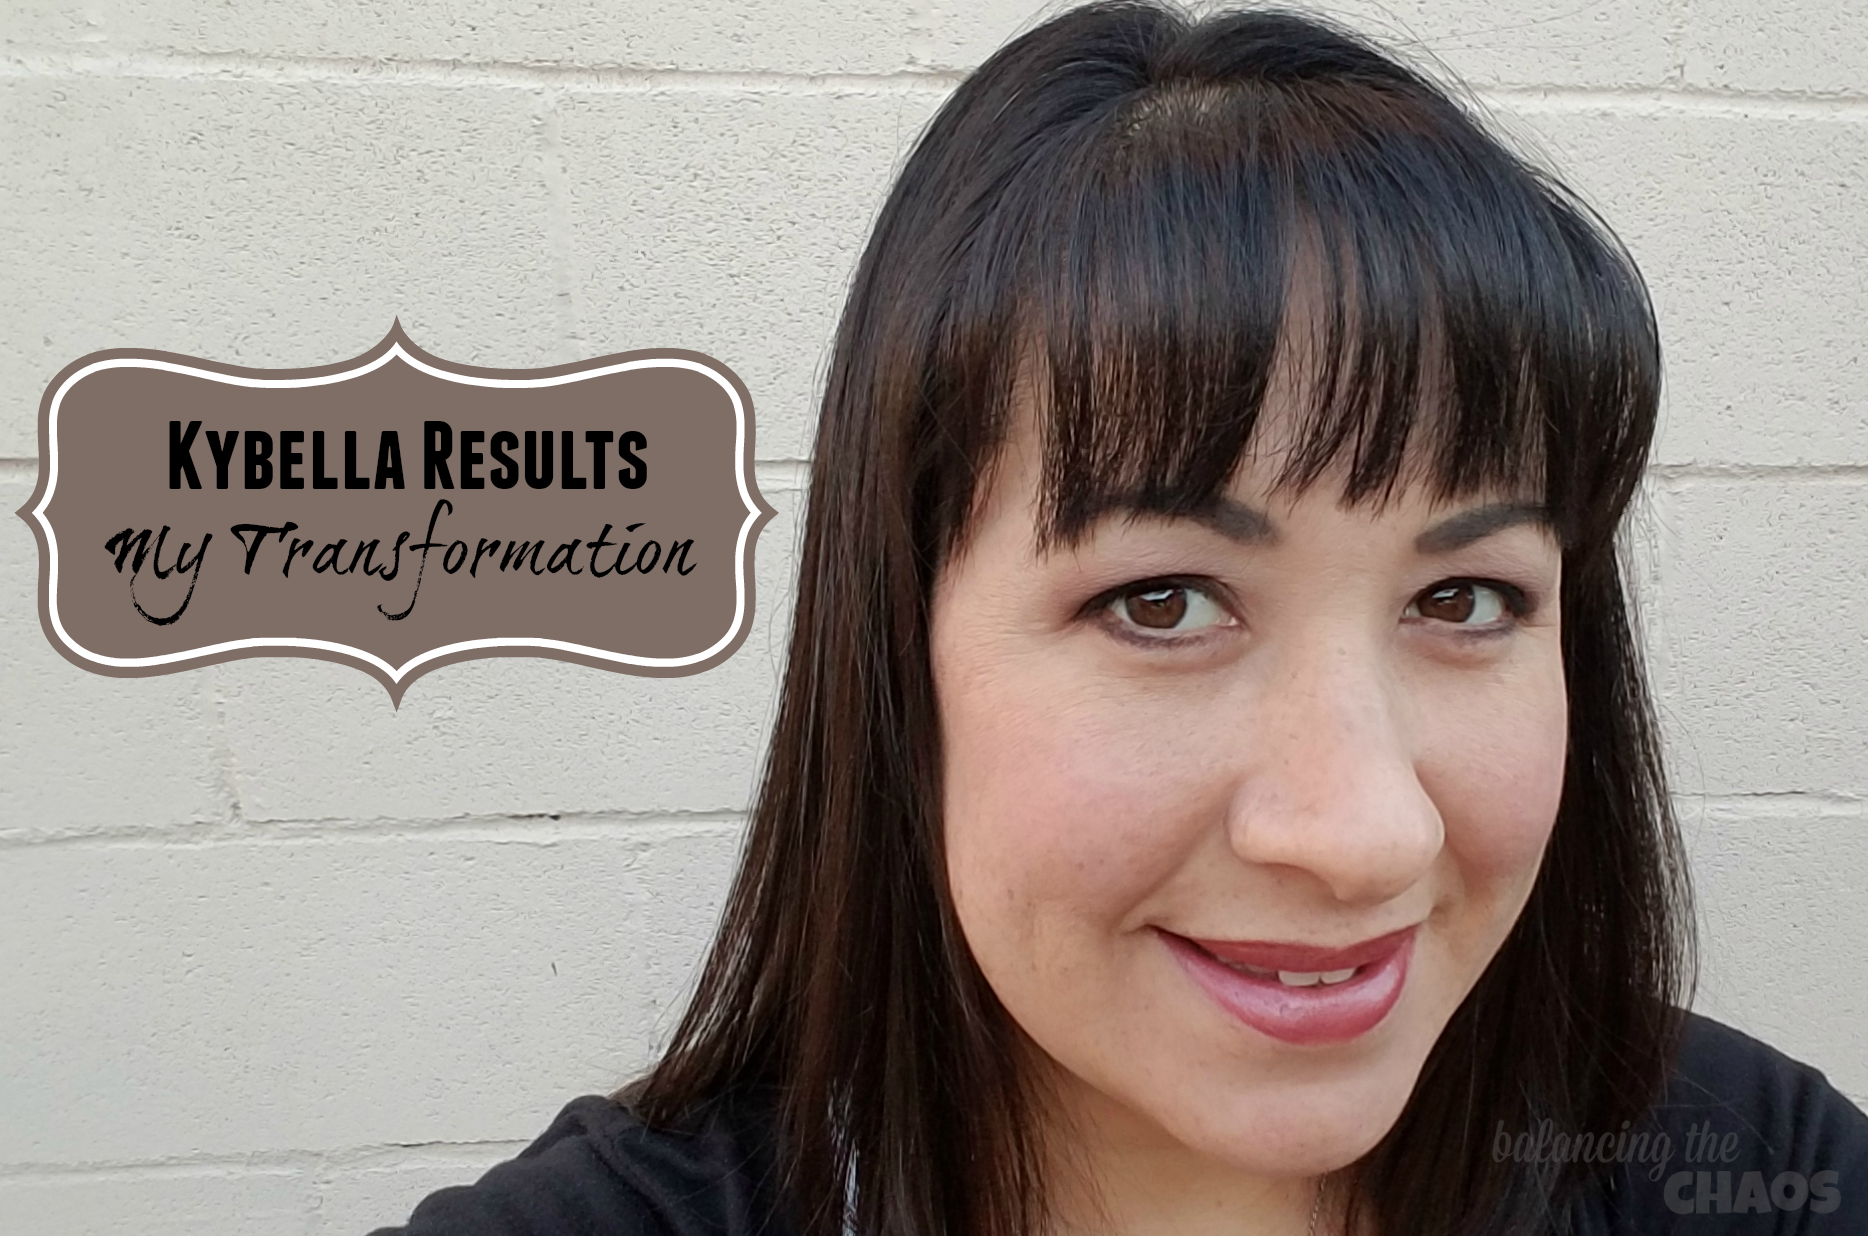 Kybella Results My Final Results and Transformation